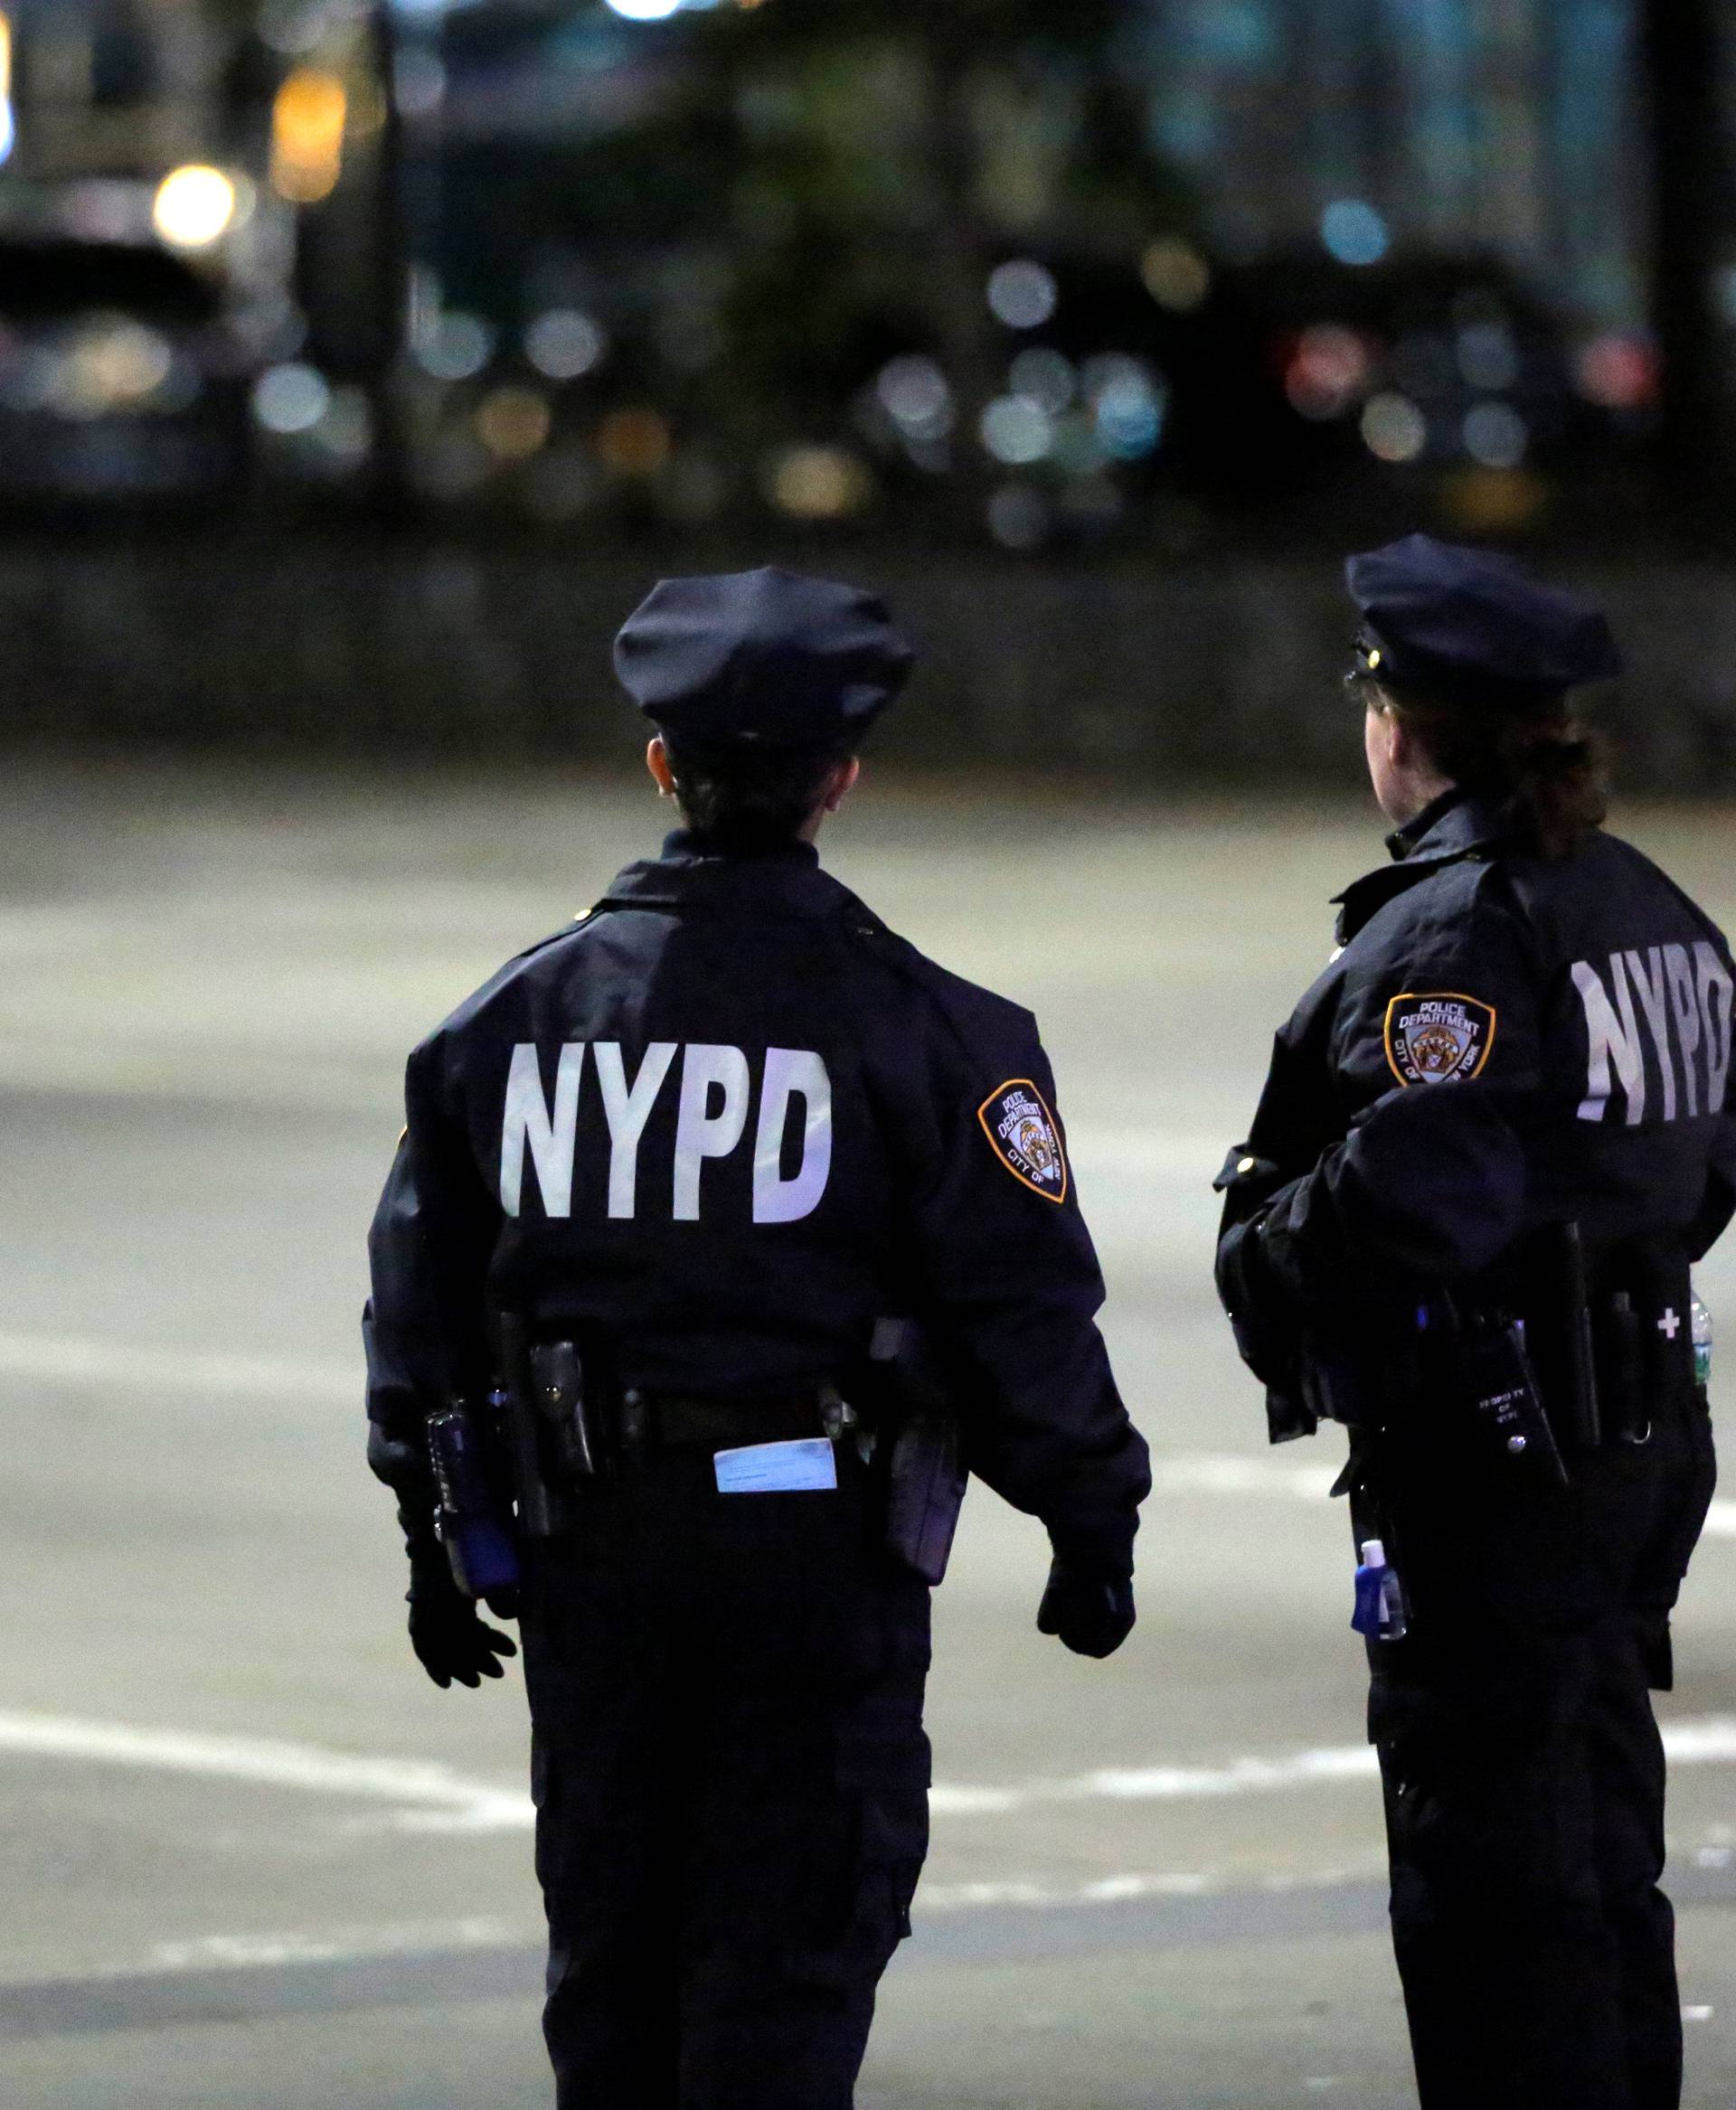 Police look towards the scene of a pickup truck attack on West Side Highway in Manhattan, New York